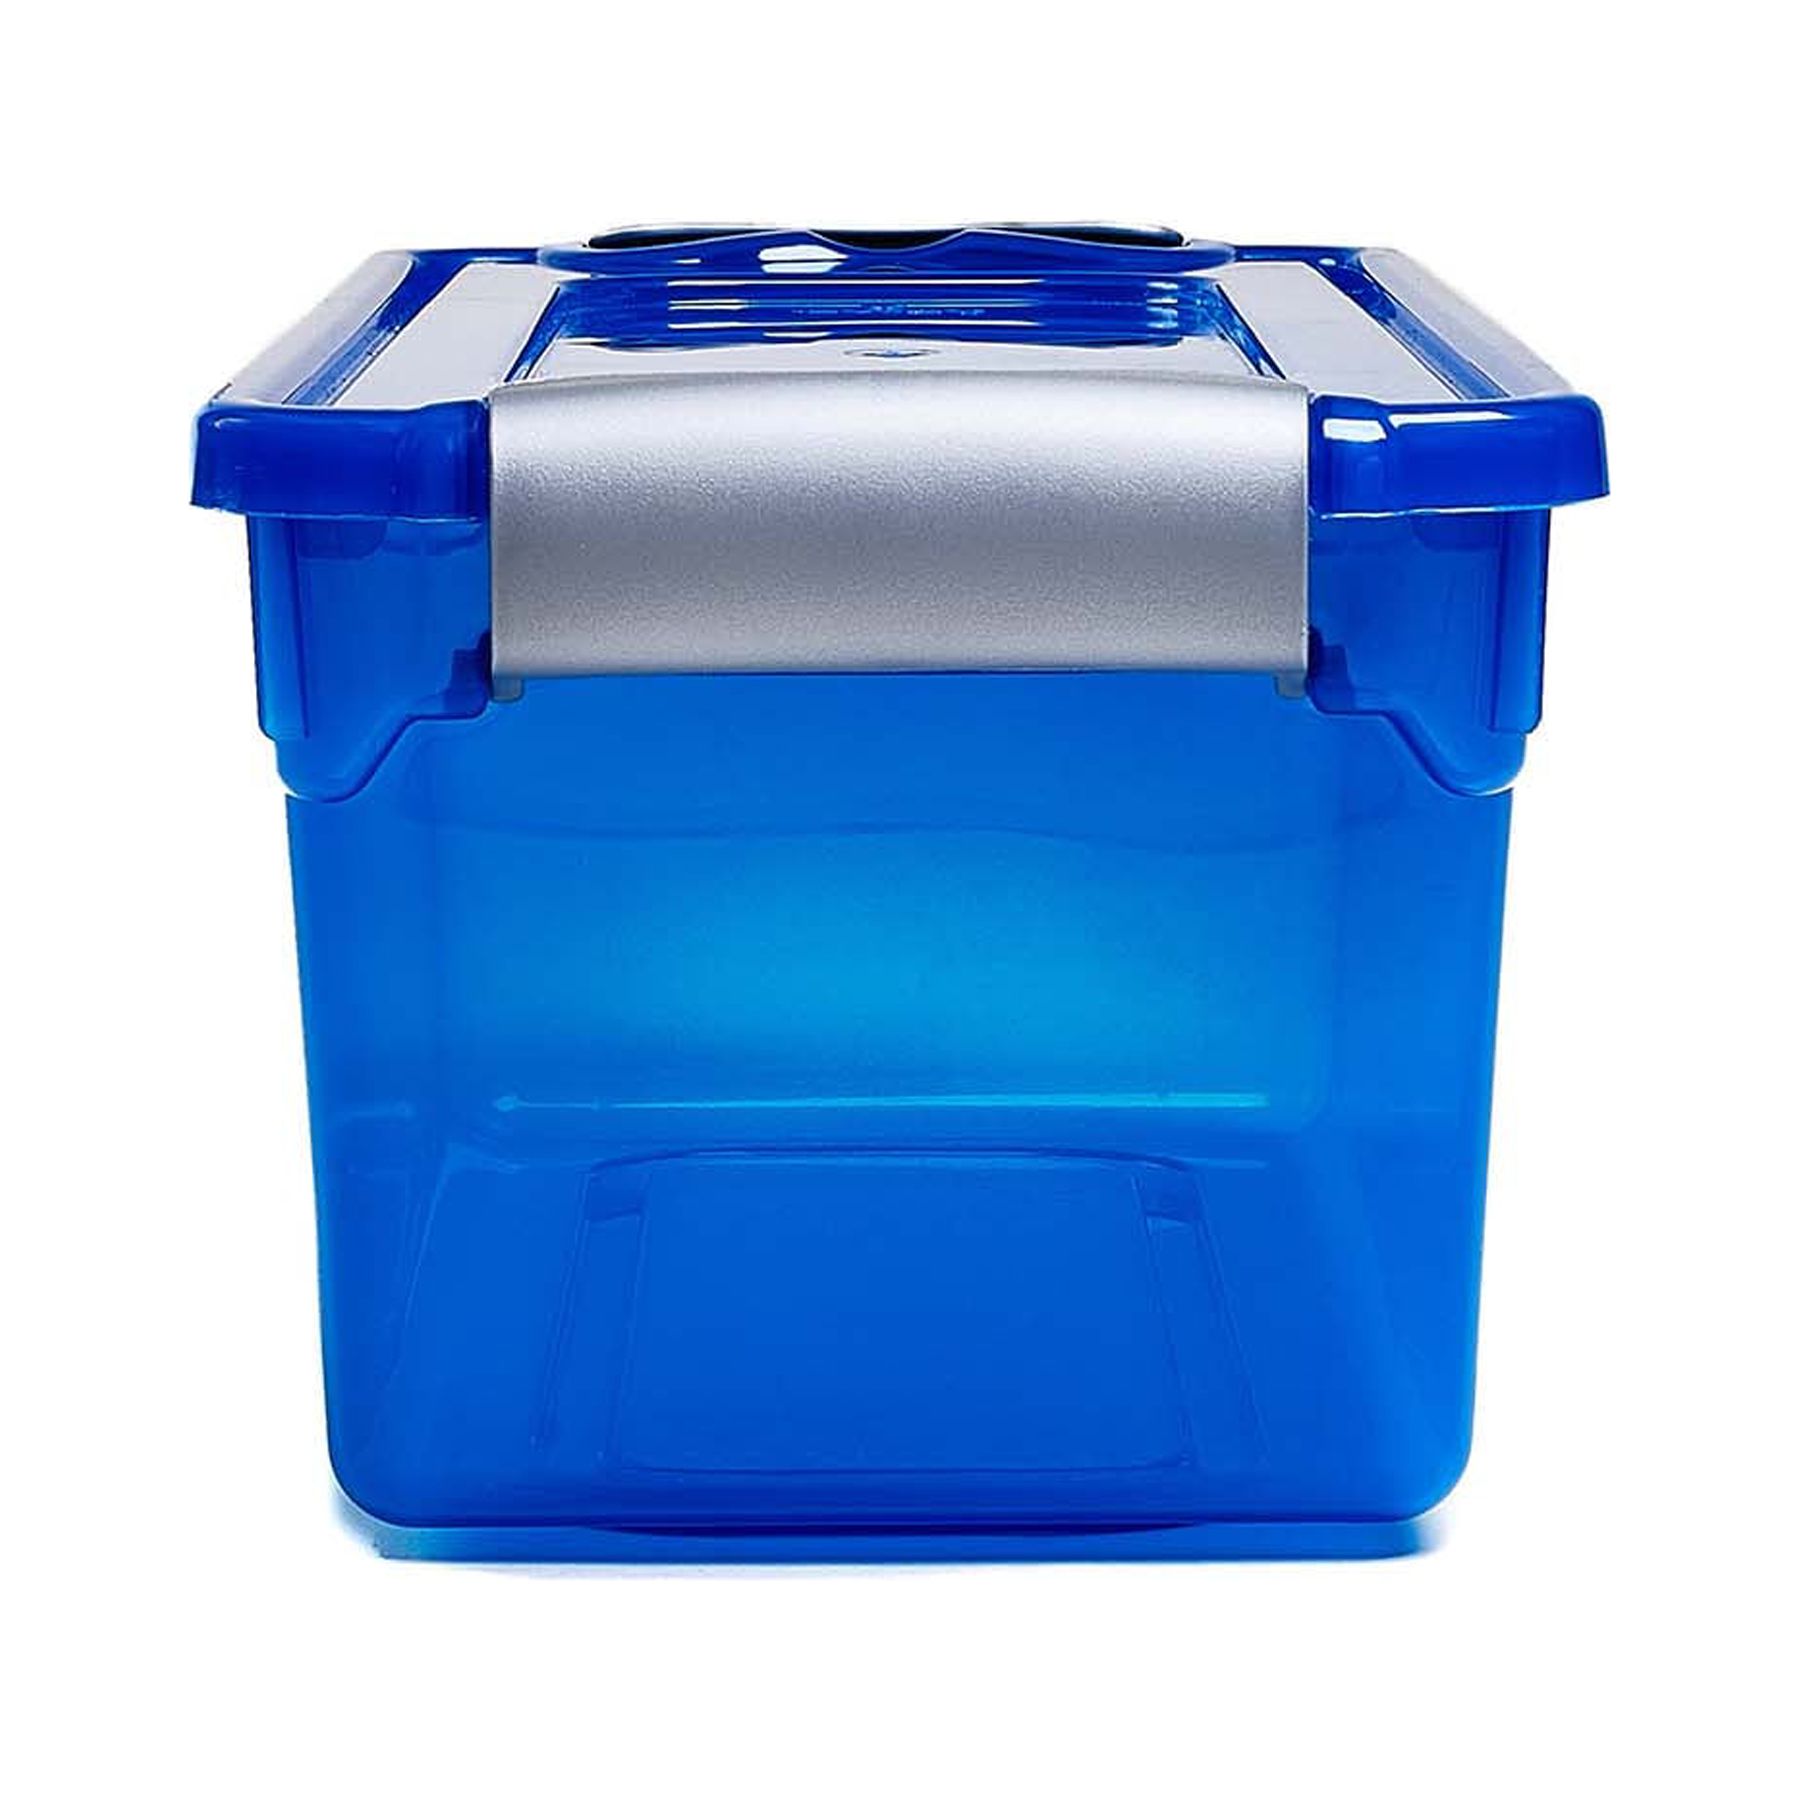 Homz 1.8 Gallon Plastic Storage Container, Blue and Clear - image 4 of 5